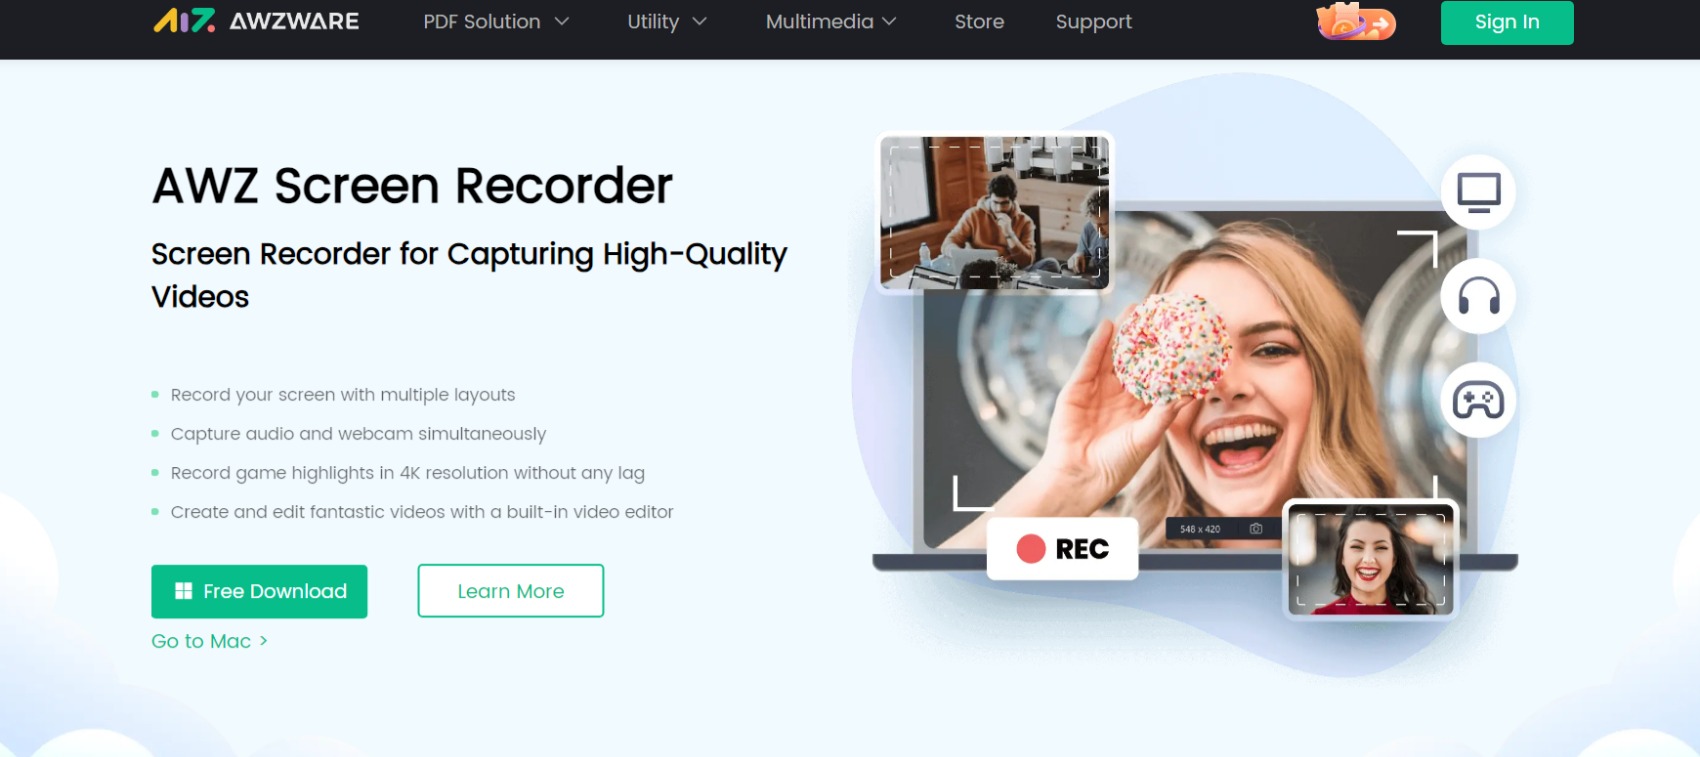 AWZ Screen Recorder's Review